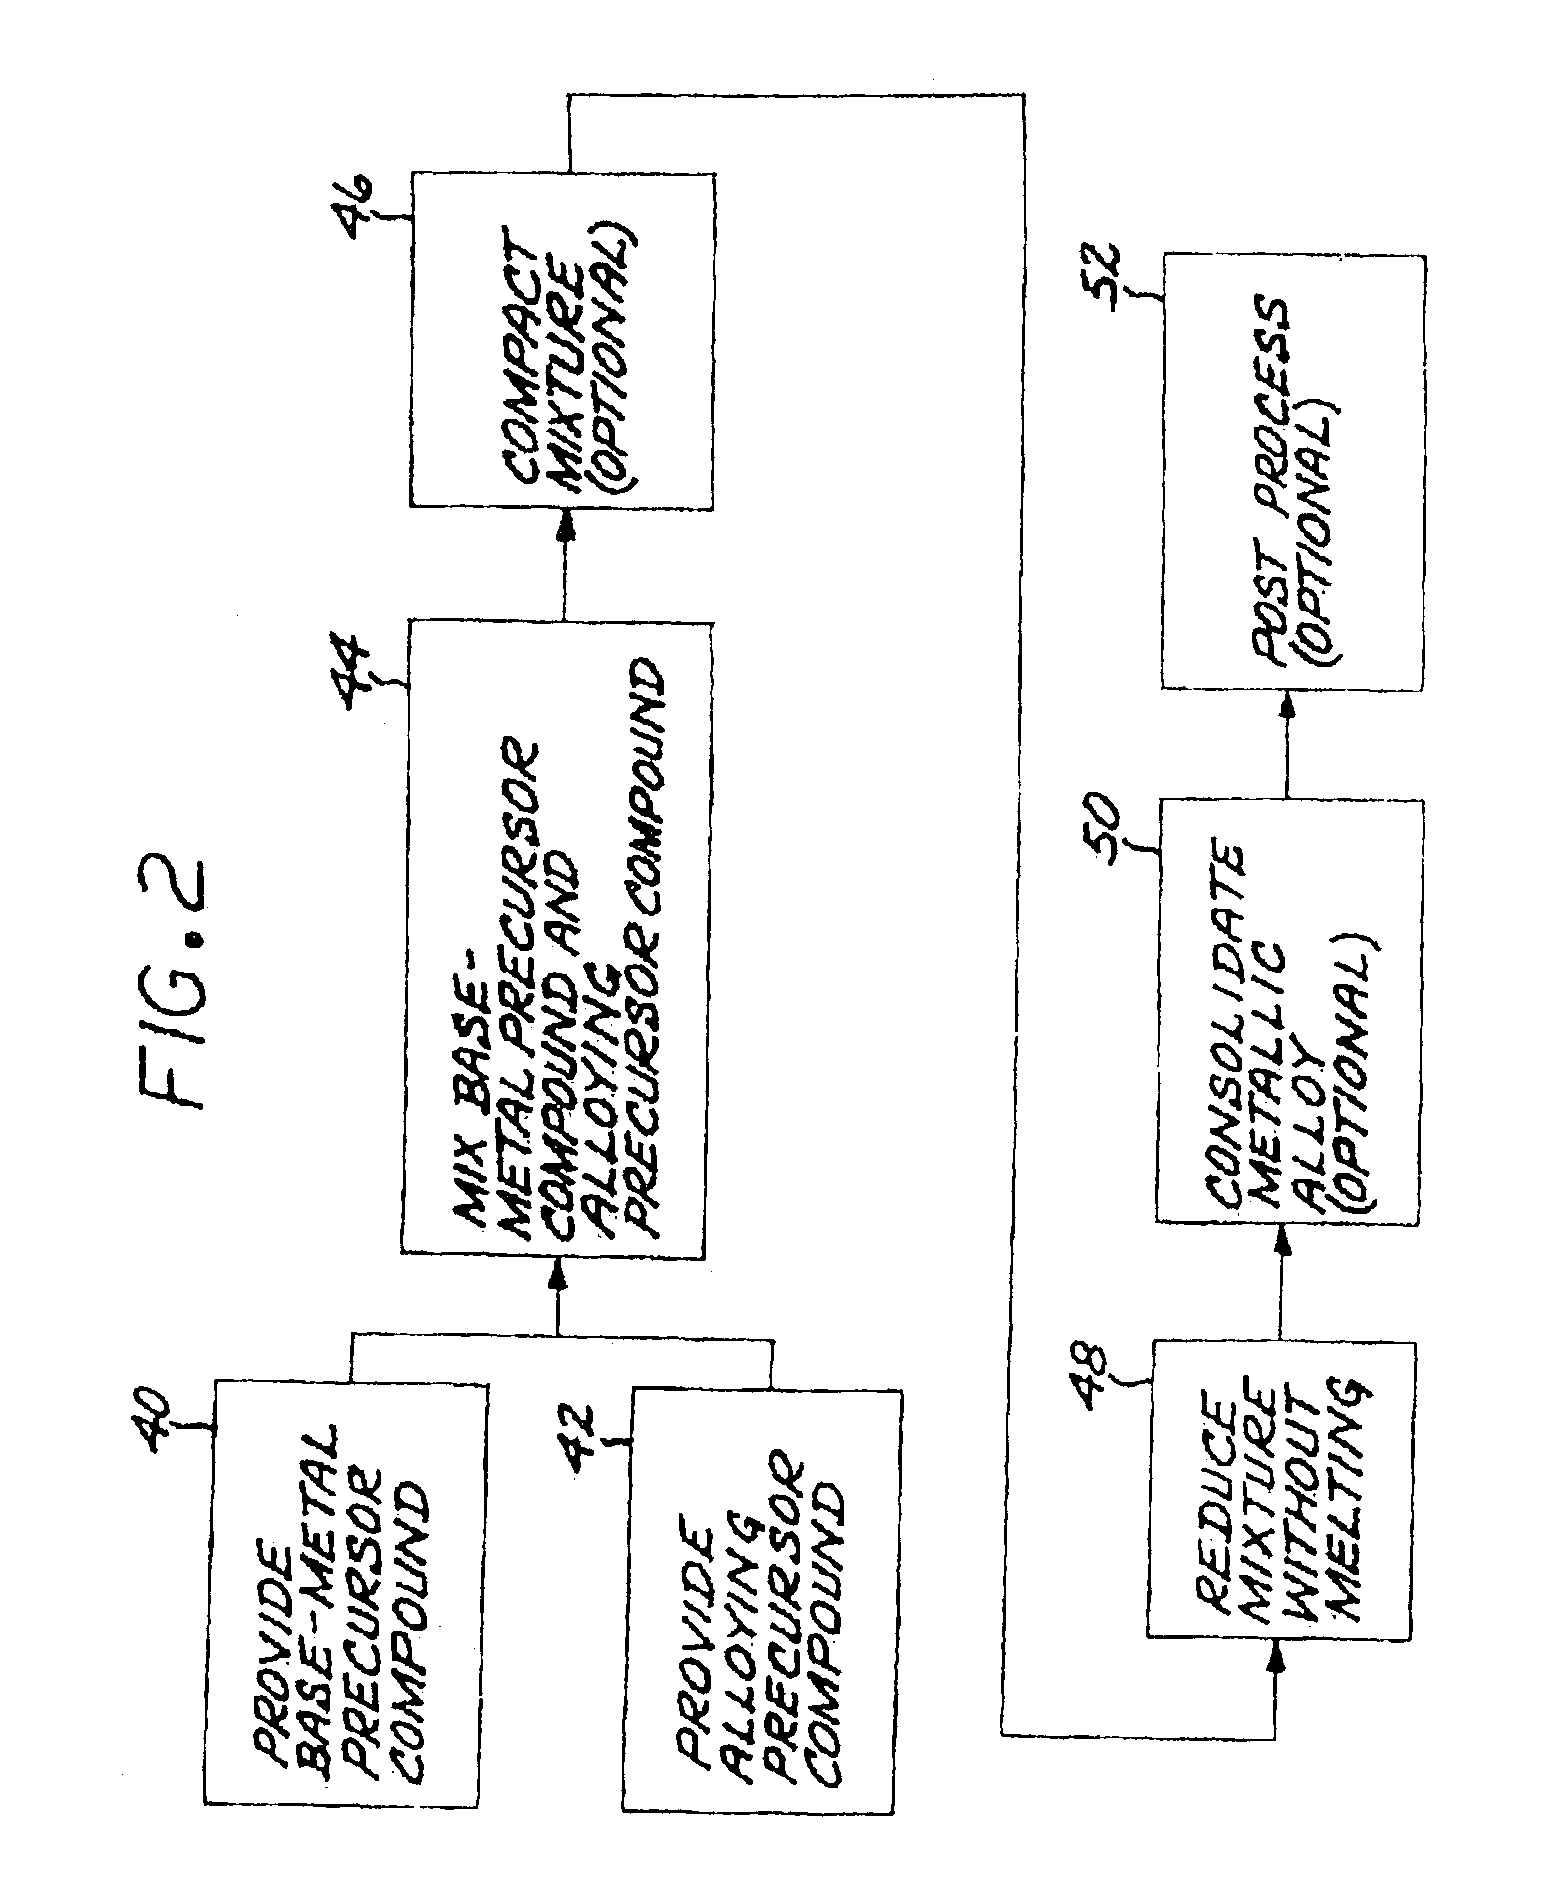 Method for preparing metallic superalloy articles having thermophysically melt incompatible alloying elements, without melting